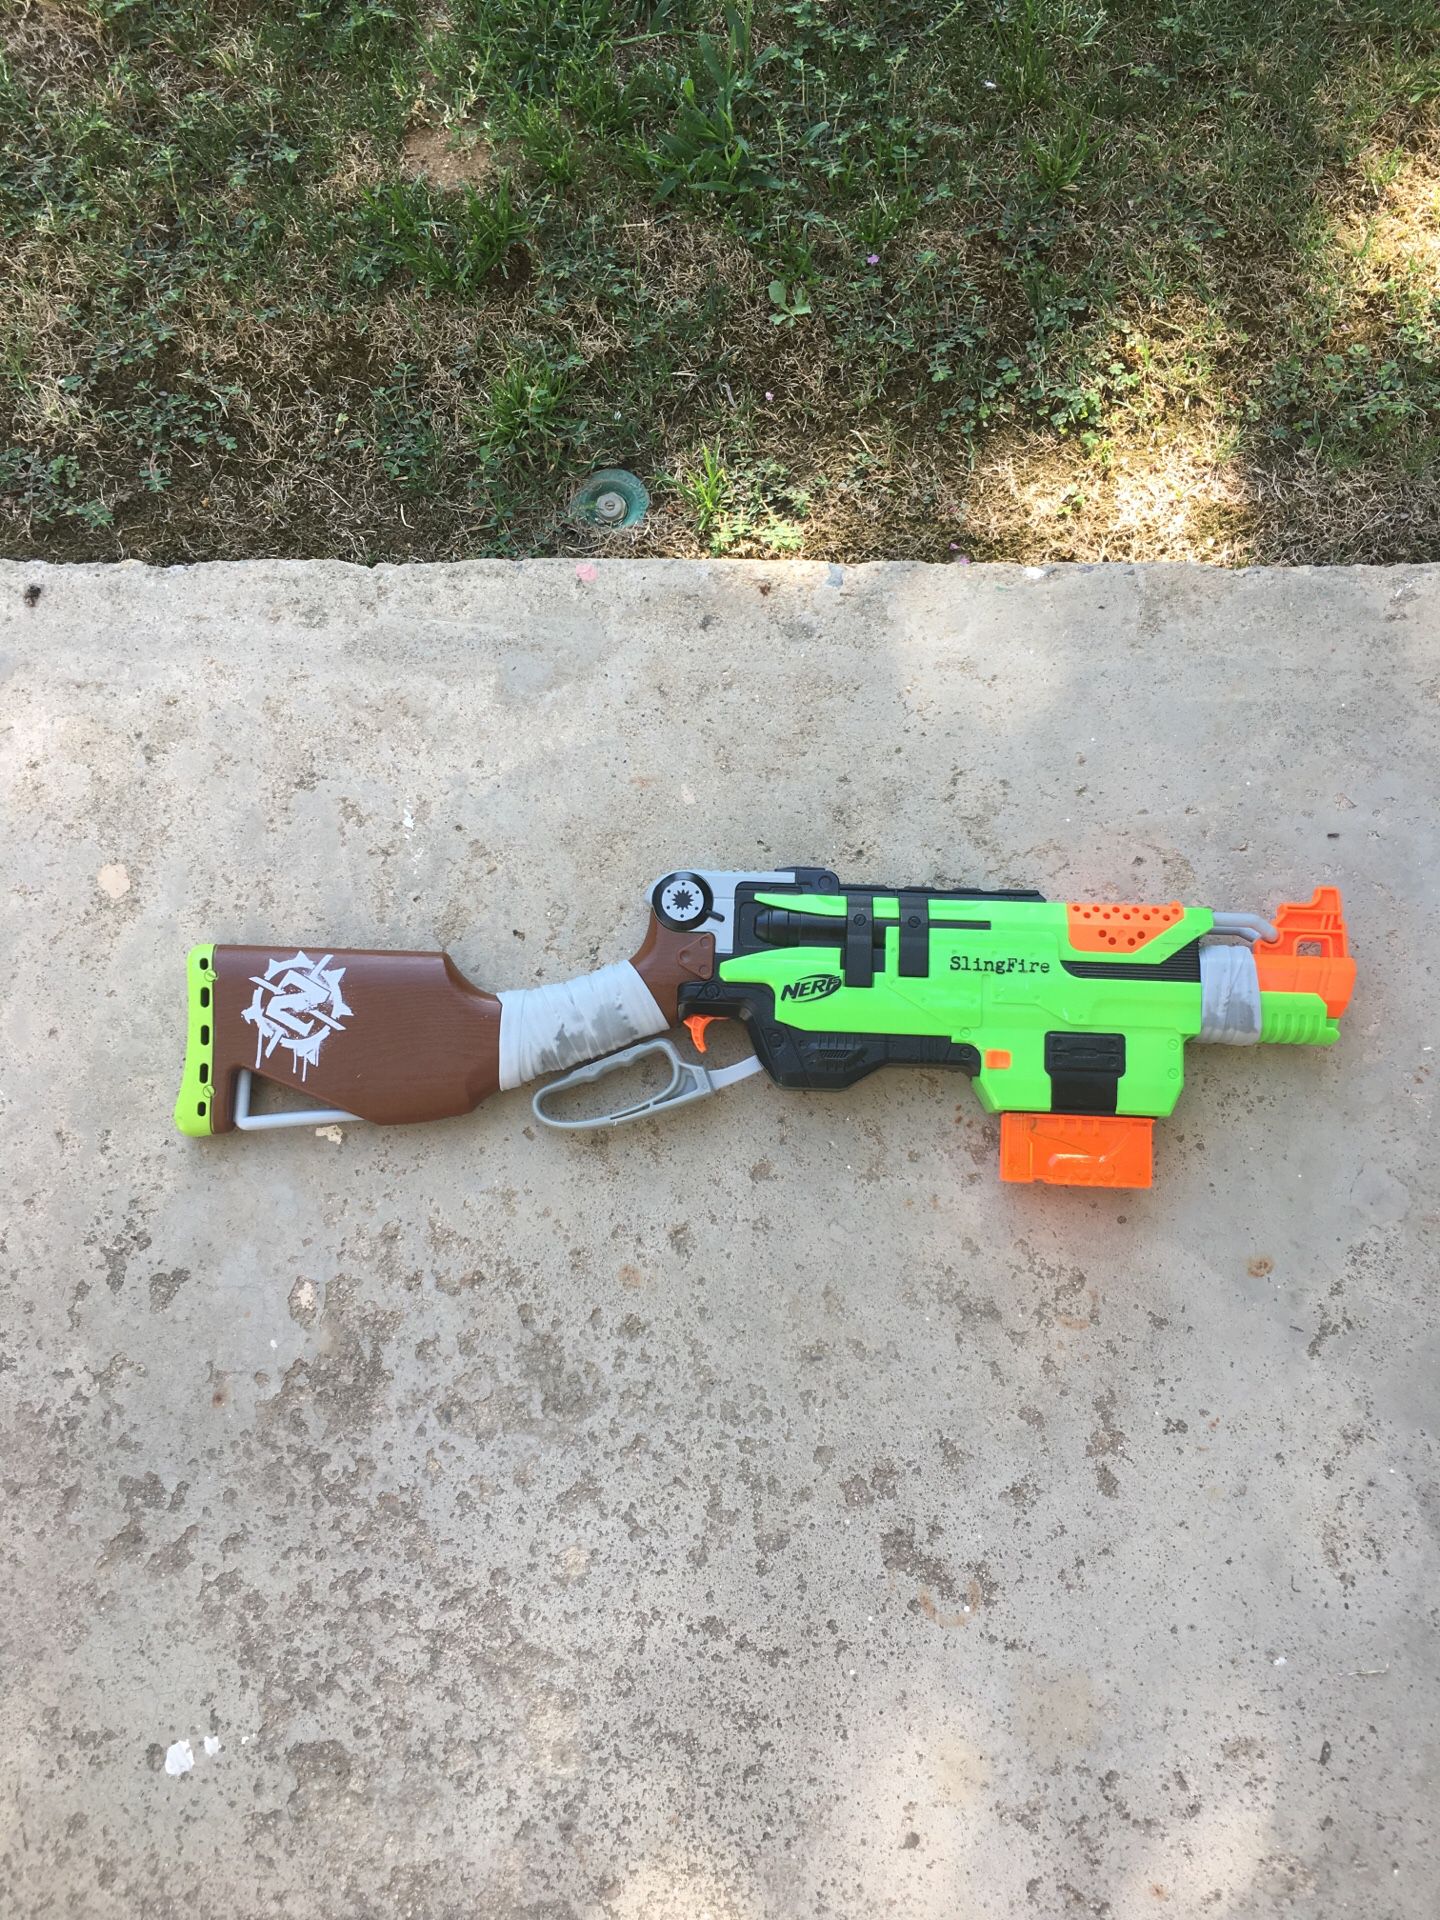 Slingfire zombie nerf gun with 10 bullets